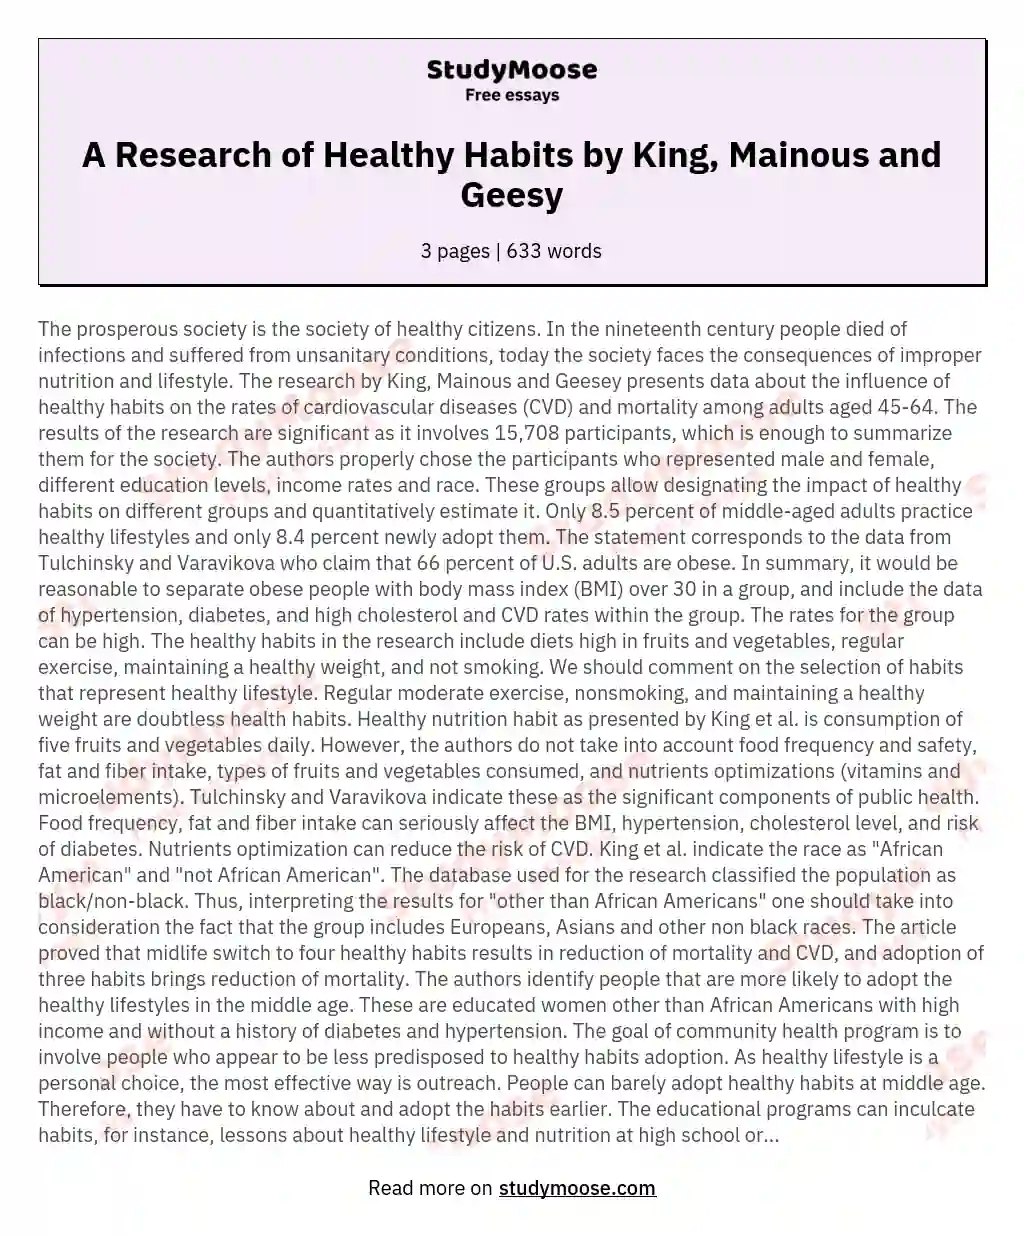 A Research of Healthy Habits by King, Mainous and Geesy essay